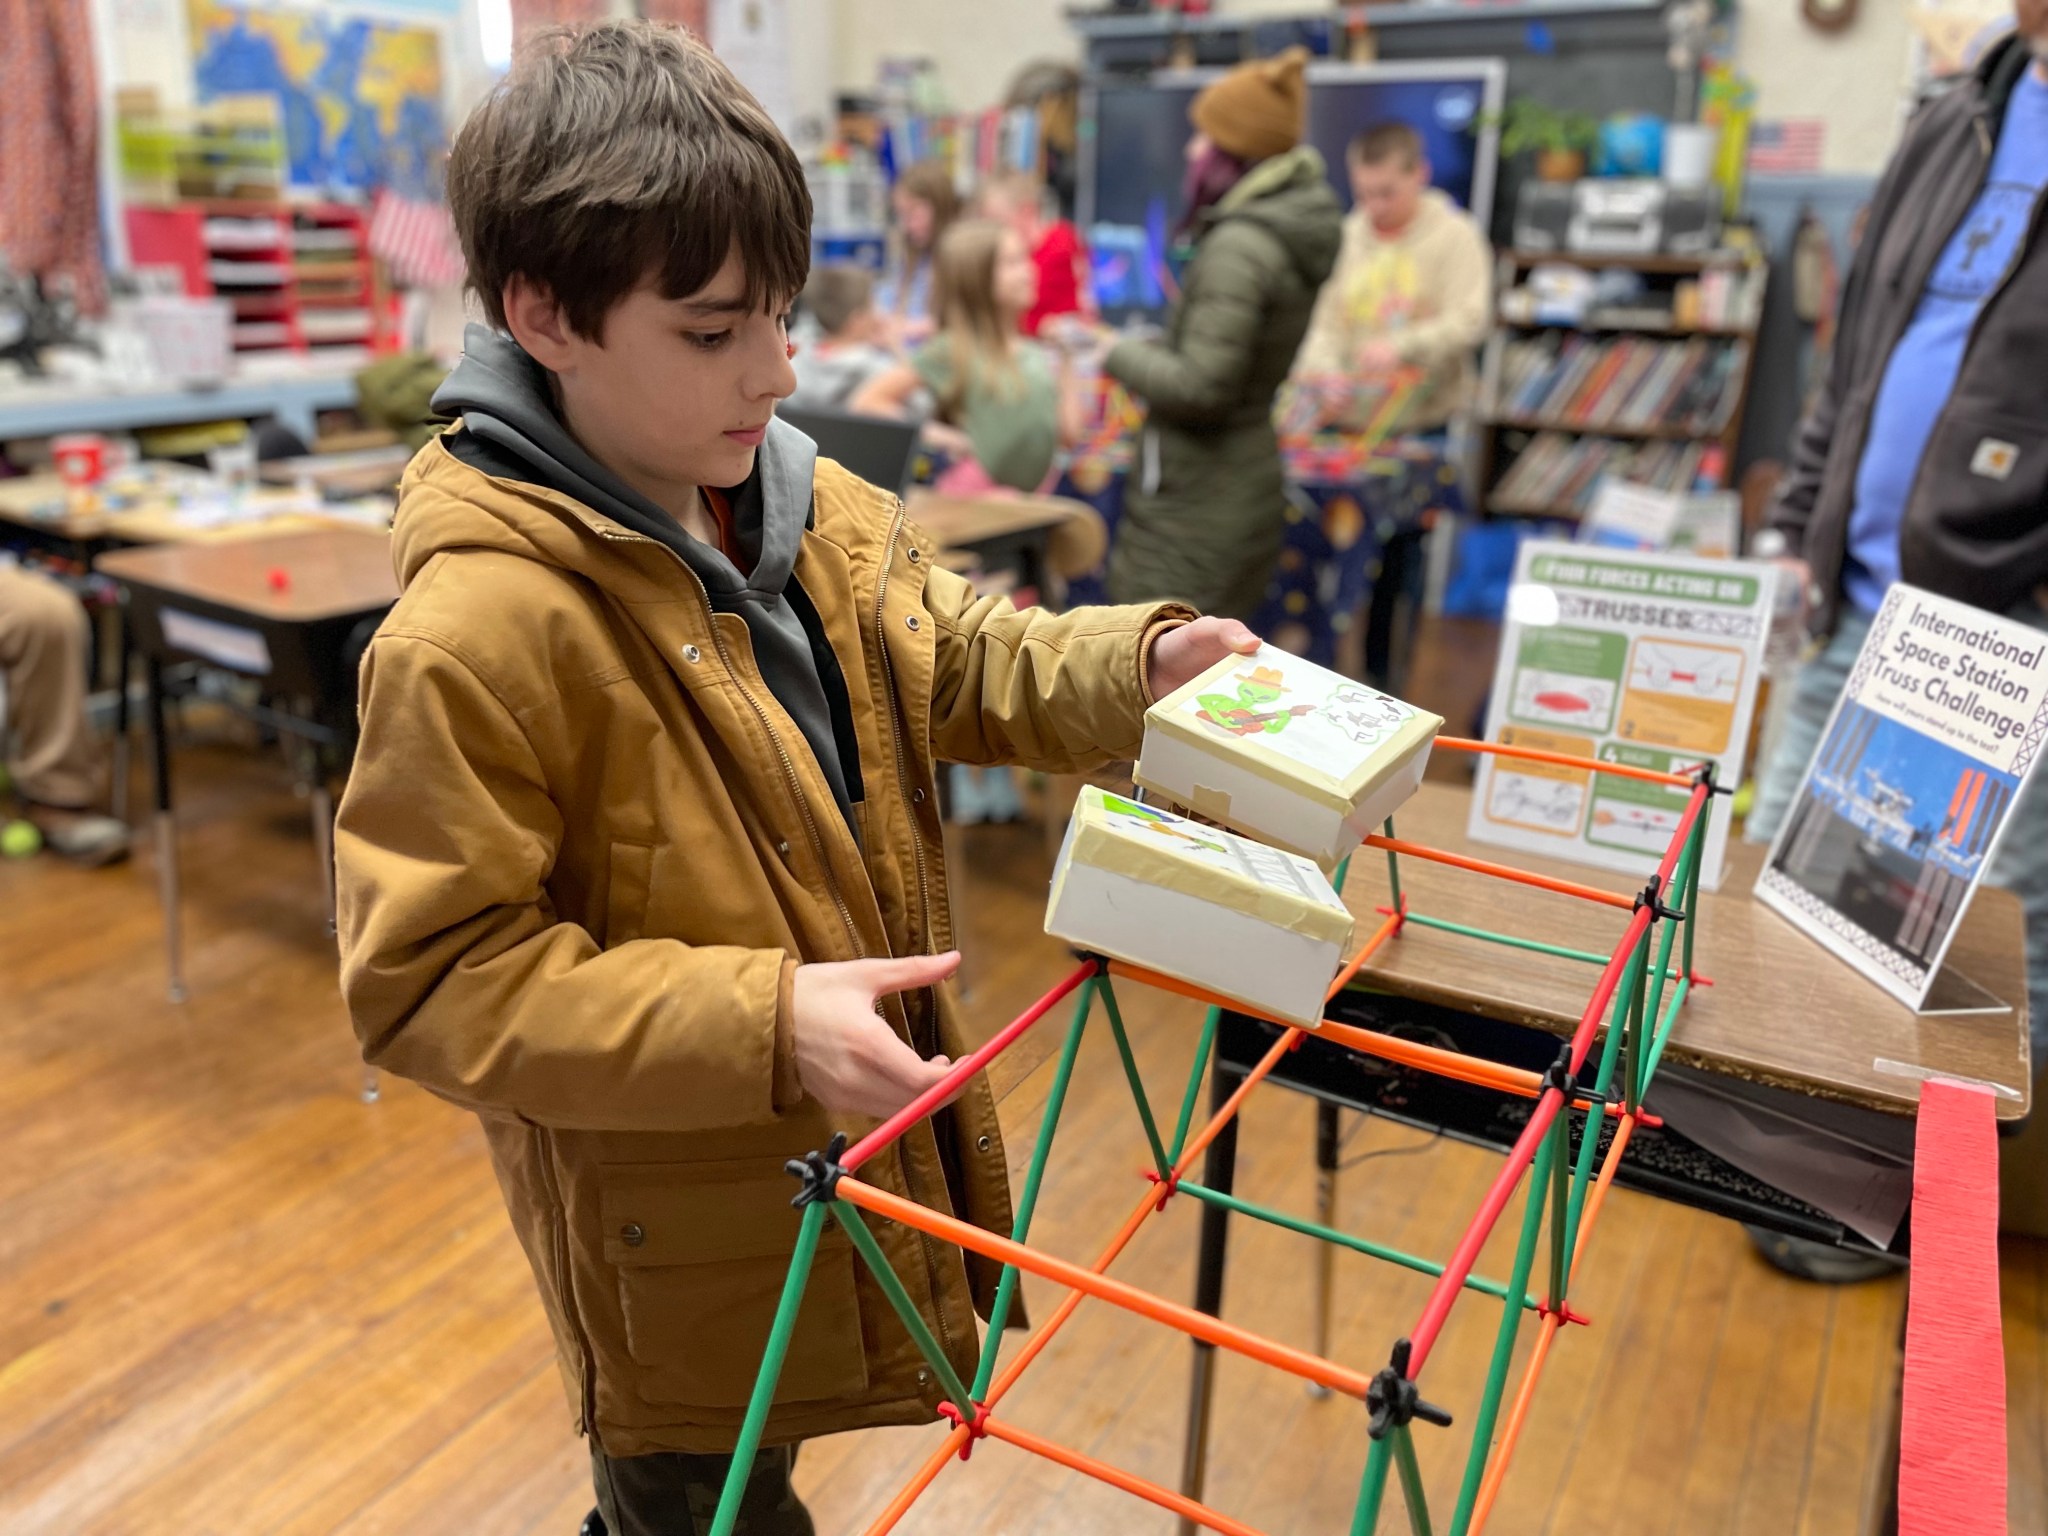 Cruz checks the load-bearing capability of his International Space Station-inspired truss structure during Moon to Mars STEM Community Night in Whiting, Maine, in February 2023.